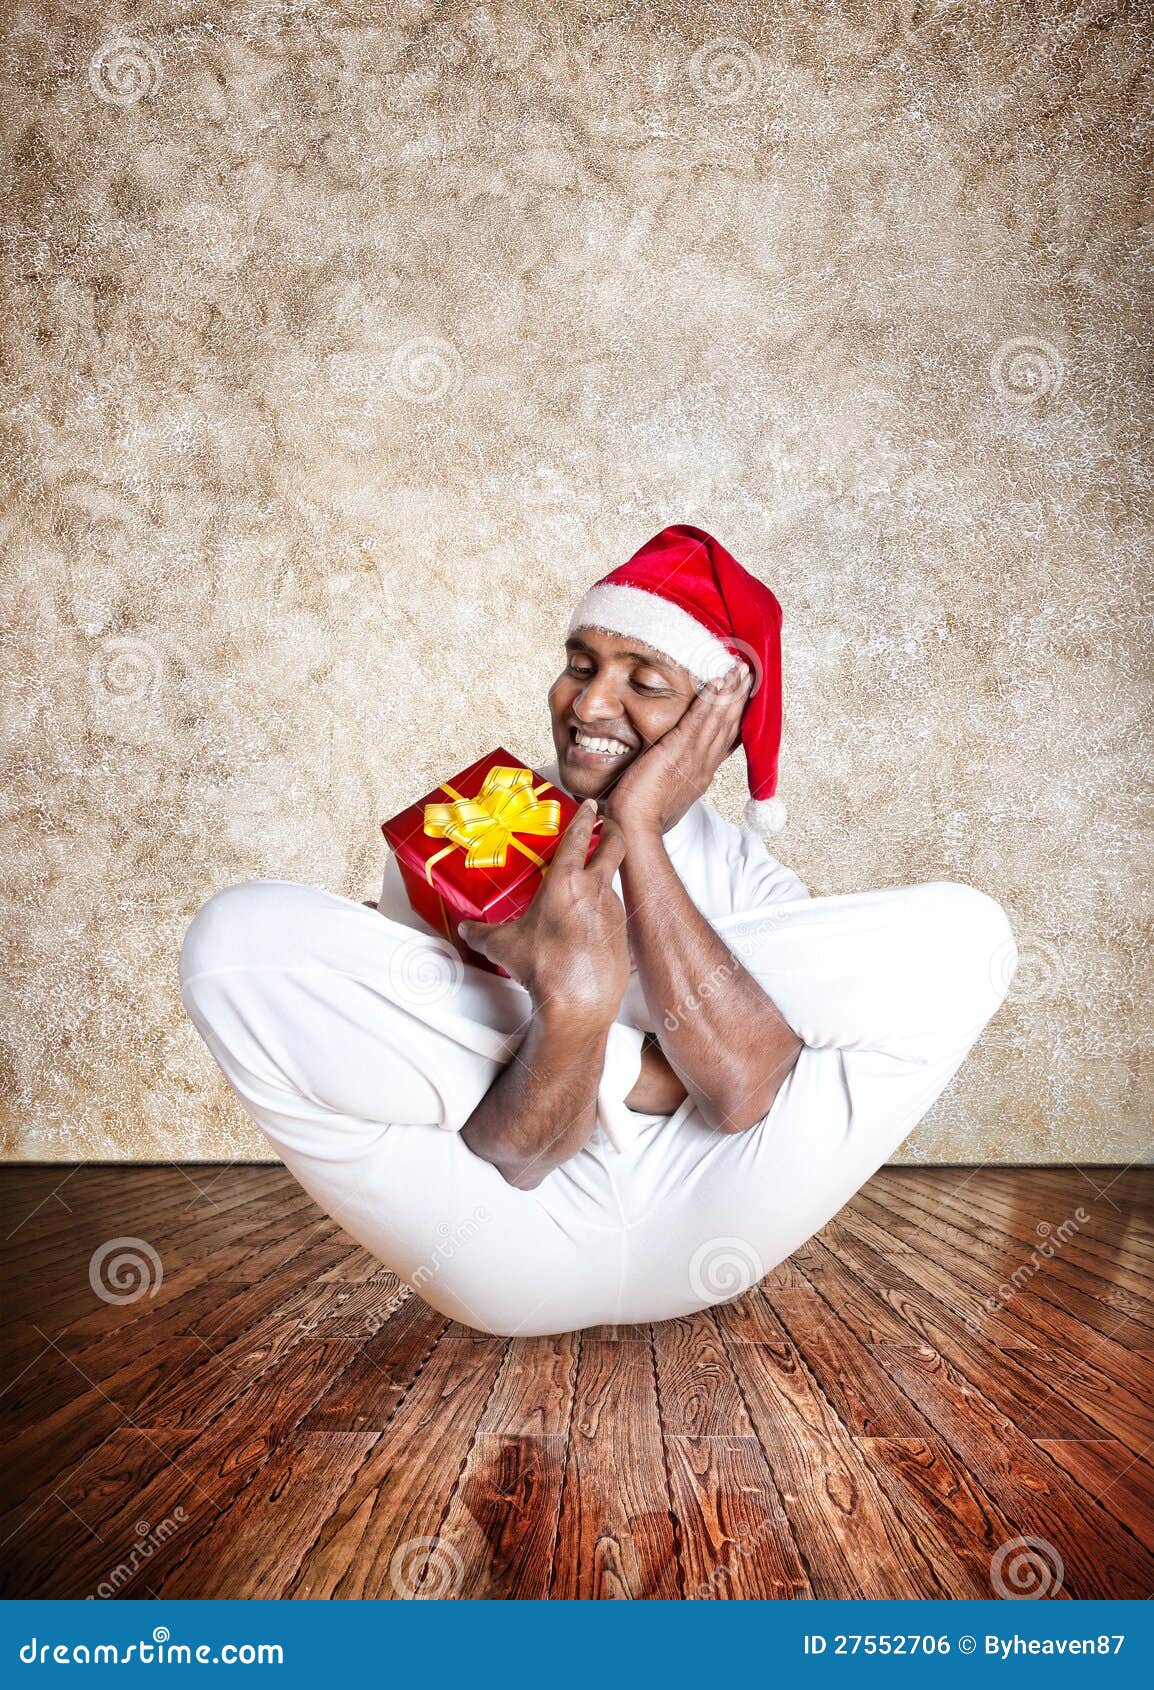 Funny Yoga Pose Stock Photos - 15,202 Images